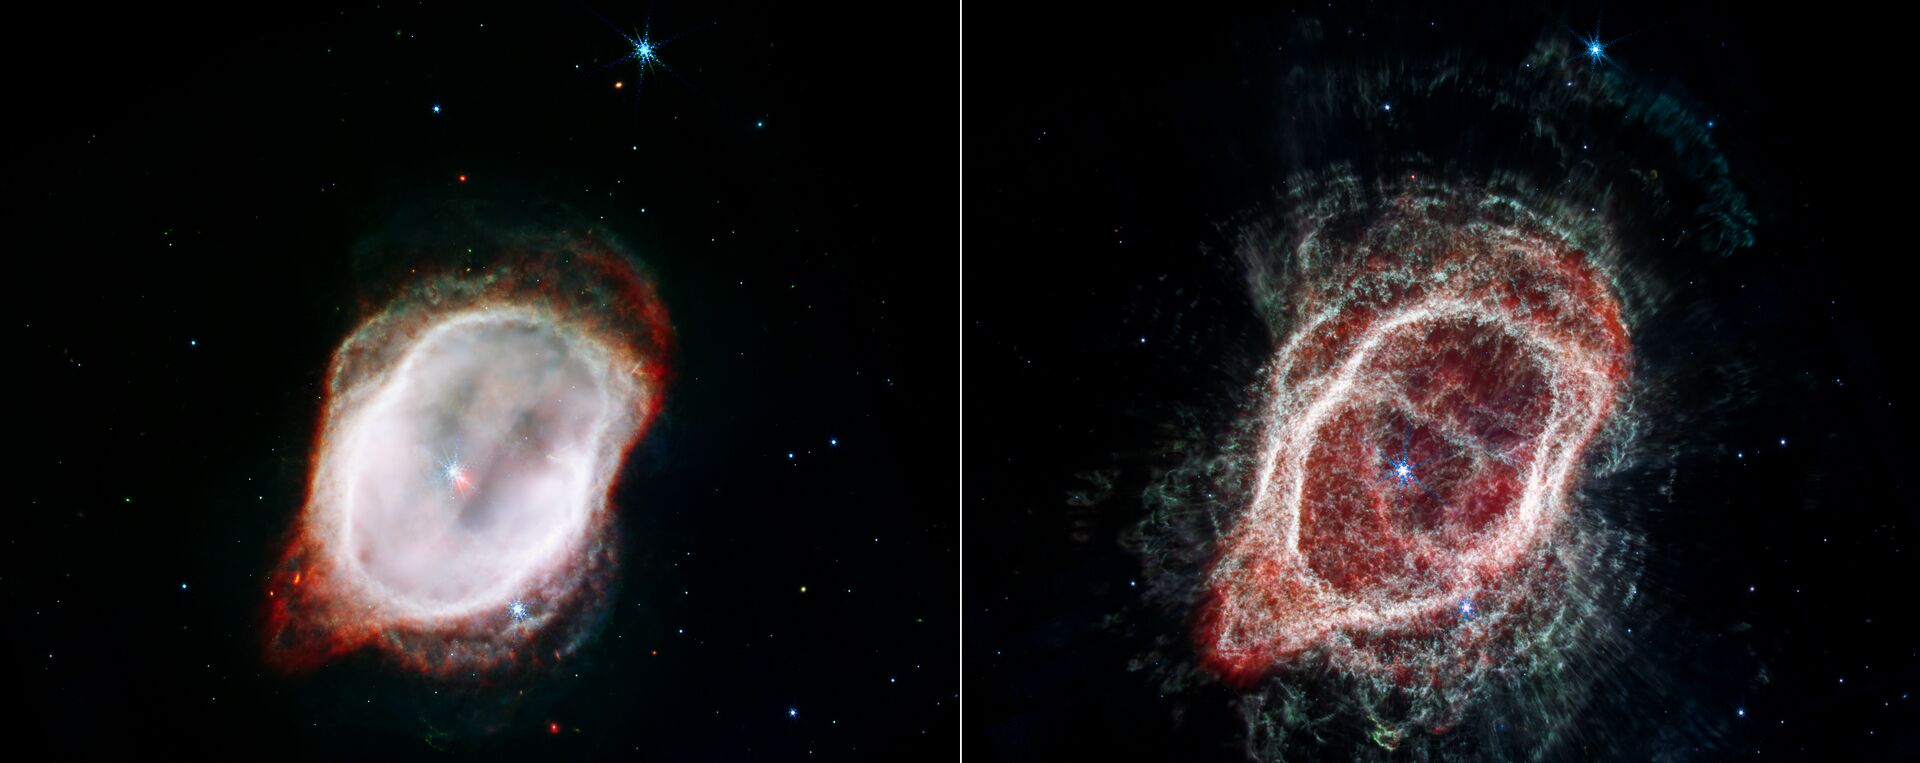 New images of a planetary nebula suggest a cosmic crime scene